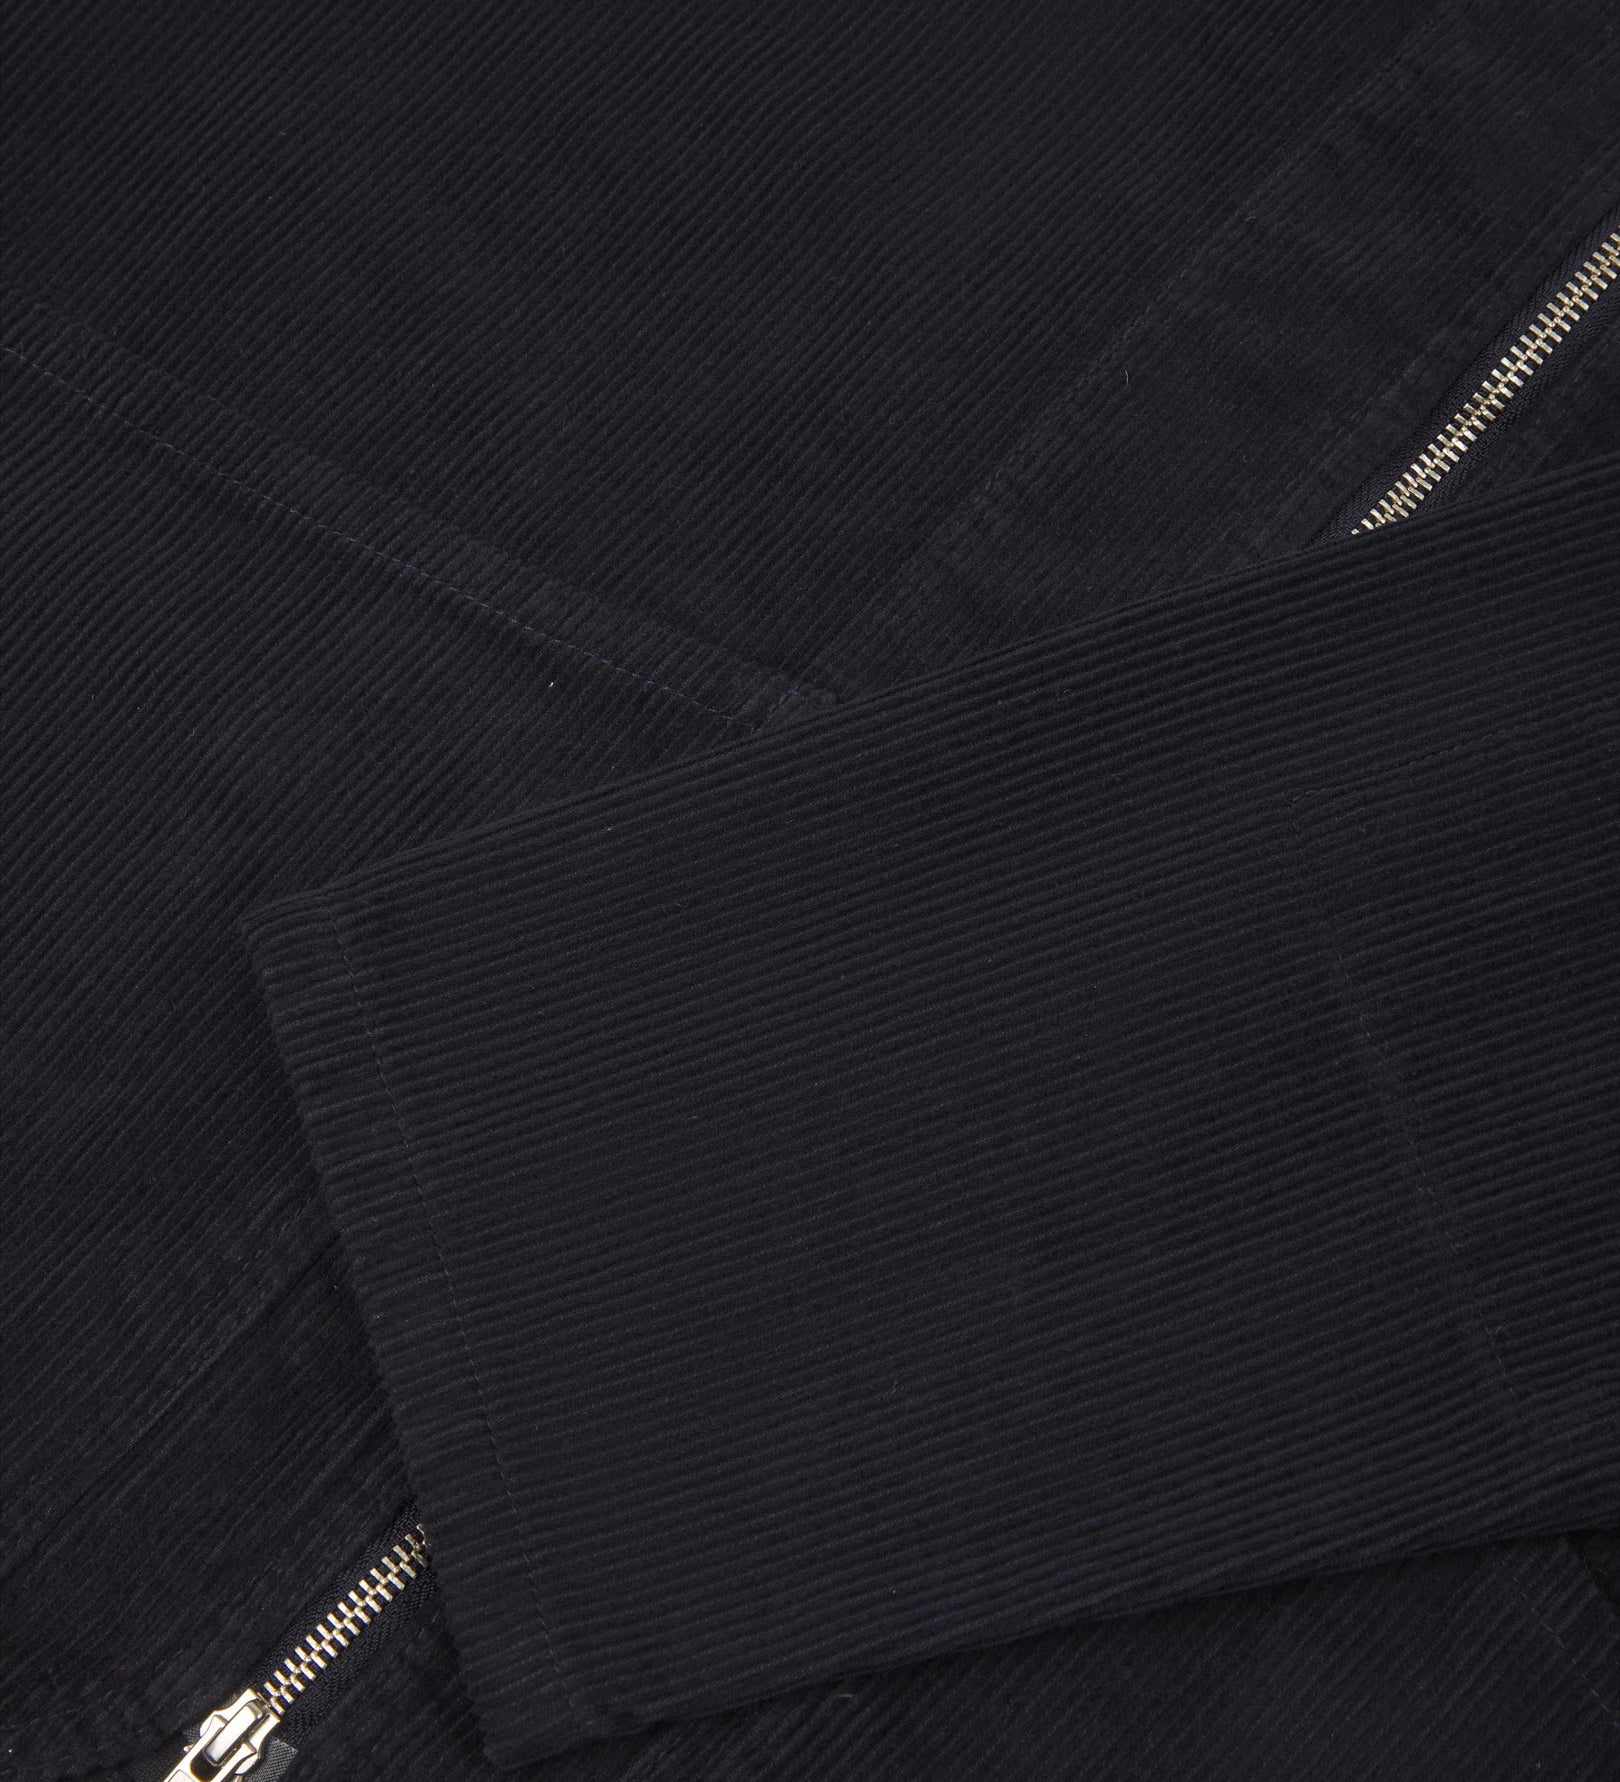 Angled close-up flat view of the pocket detailing of #5030 Uskees midnight blue jacket. View of wide, diagonal cut pockets, reinforced elbows and cuffs.